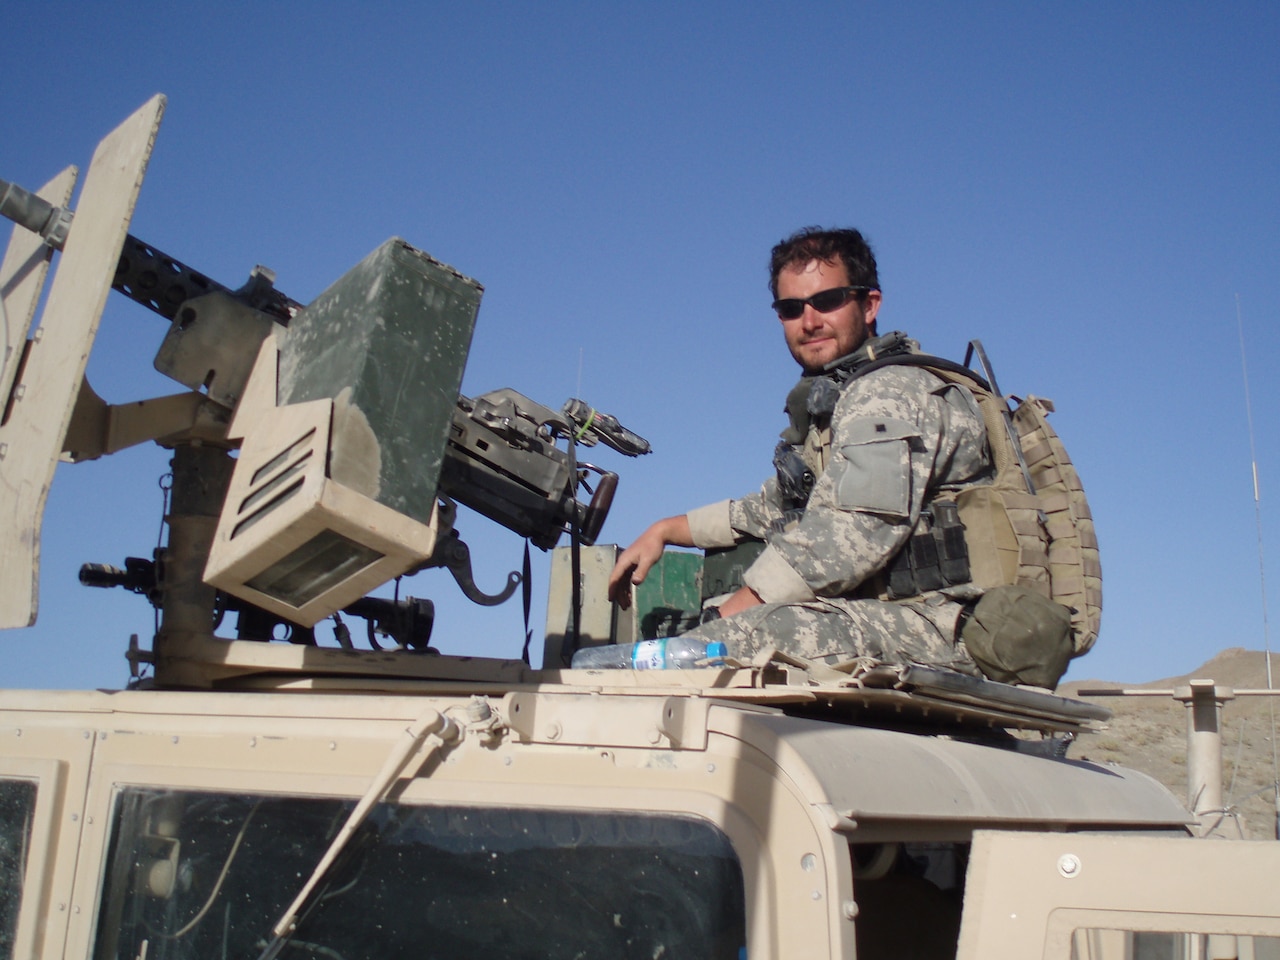 Soldier poses with gun on armored vehicle.